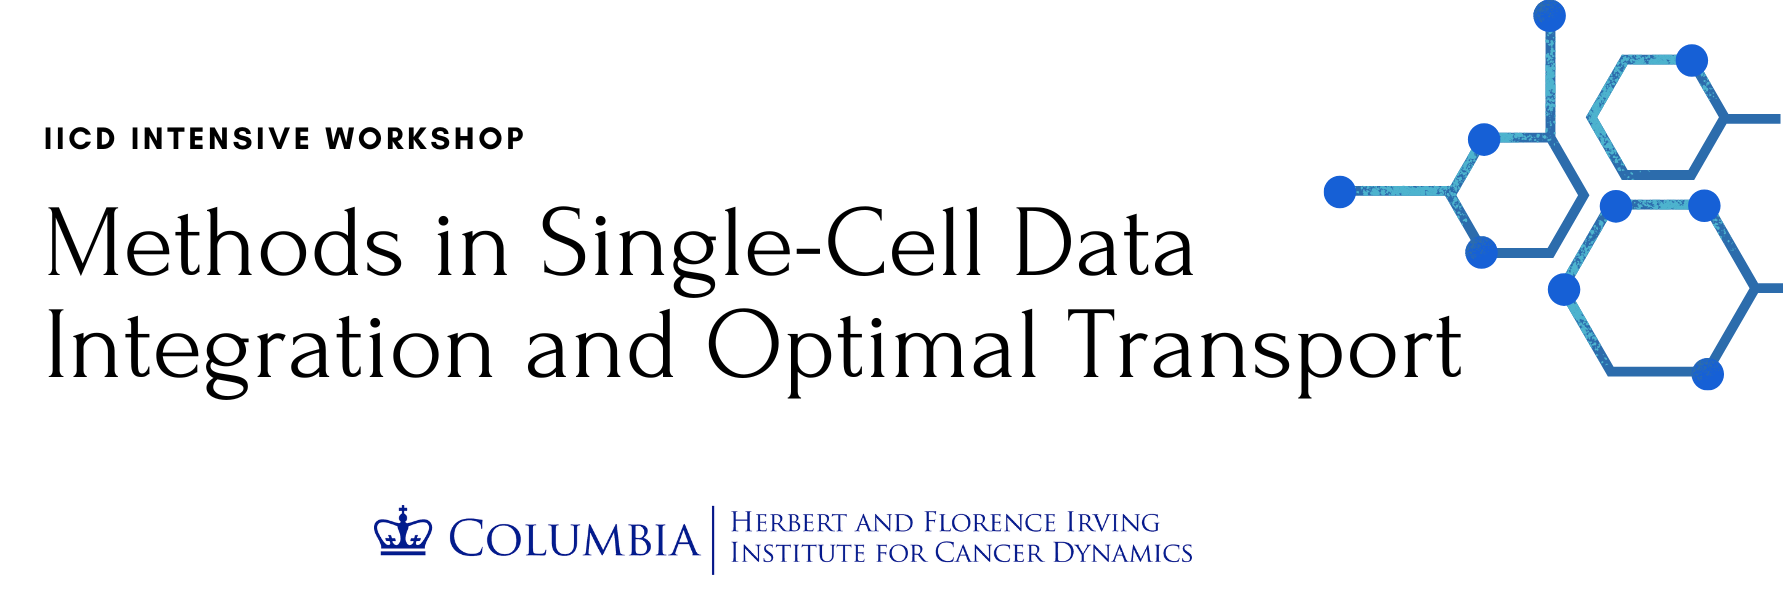 IICD Intensive Workshop: Methods in Single-Cell Data Integration and Optimal Transport 